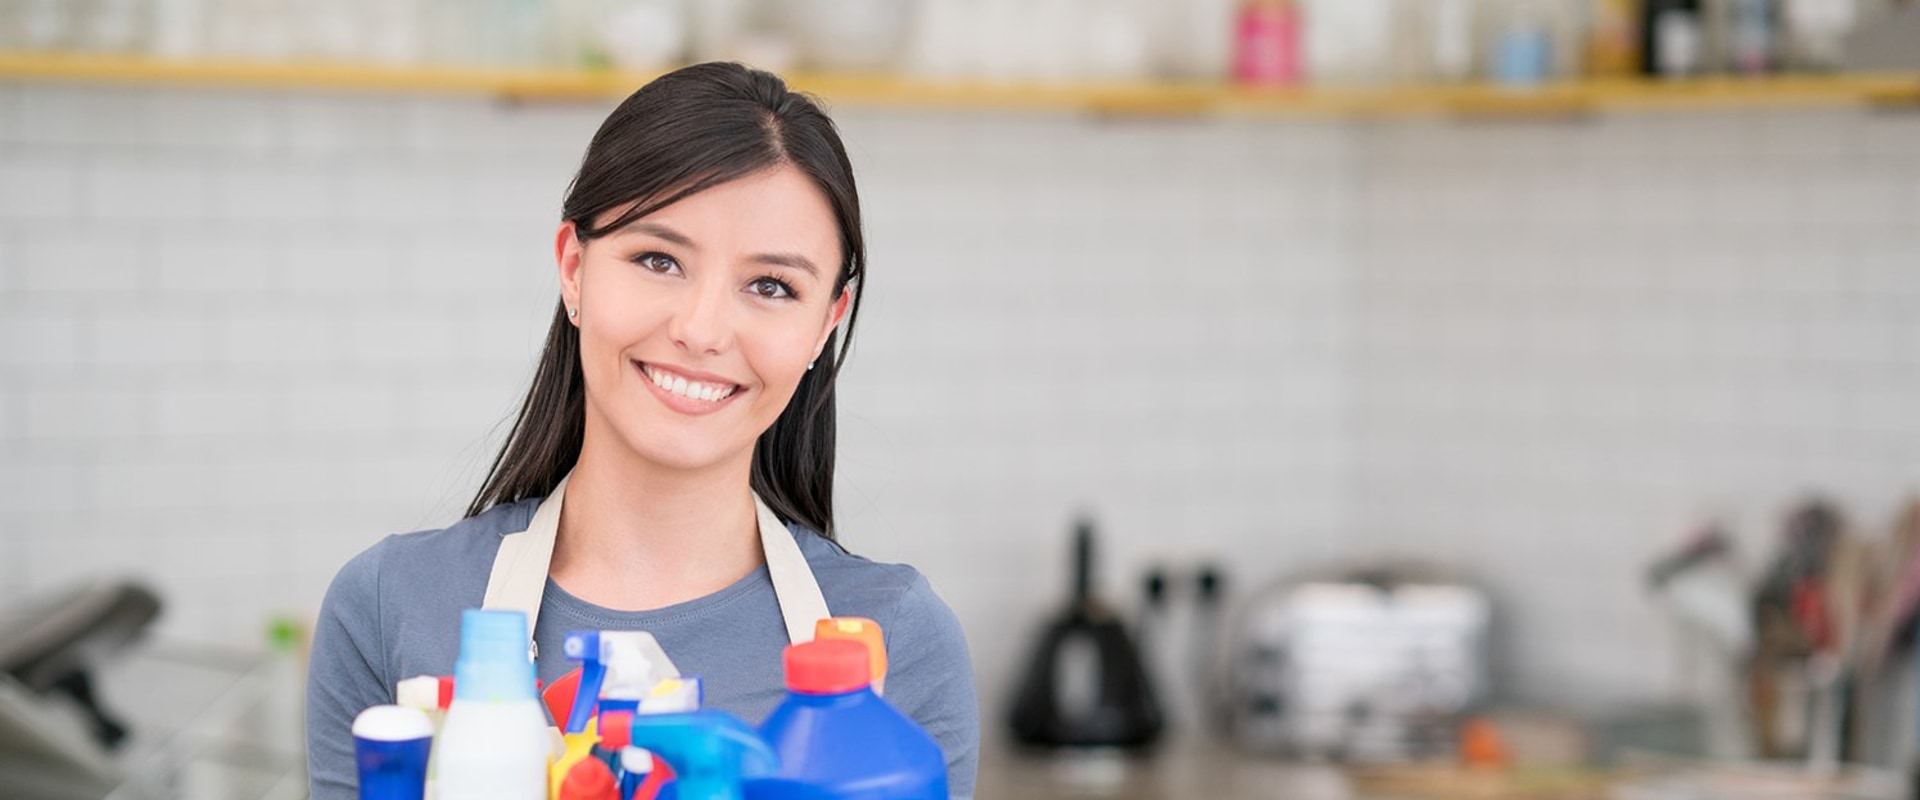 Can a cleaning business be successful?